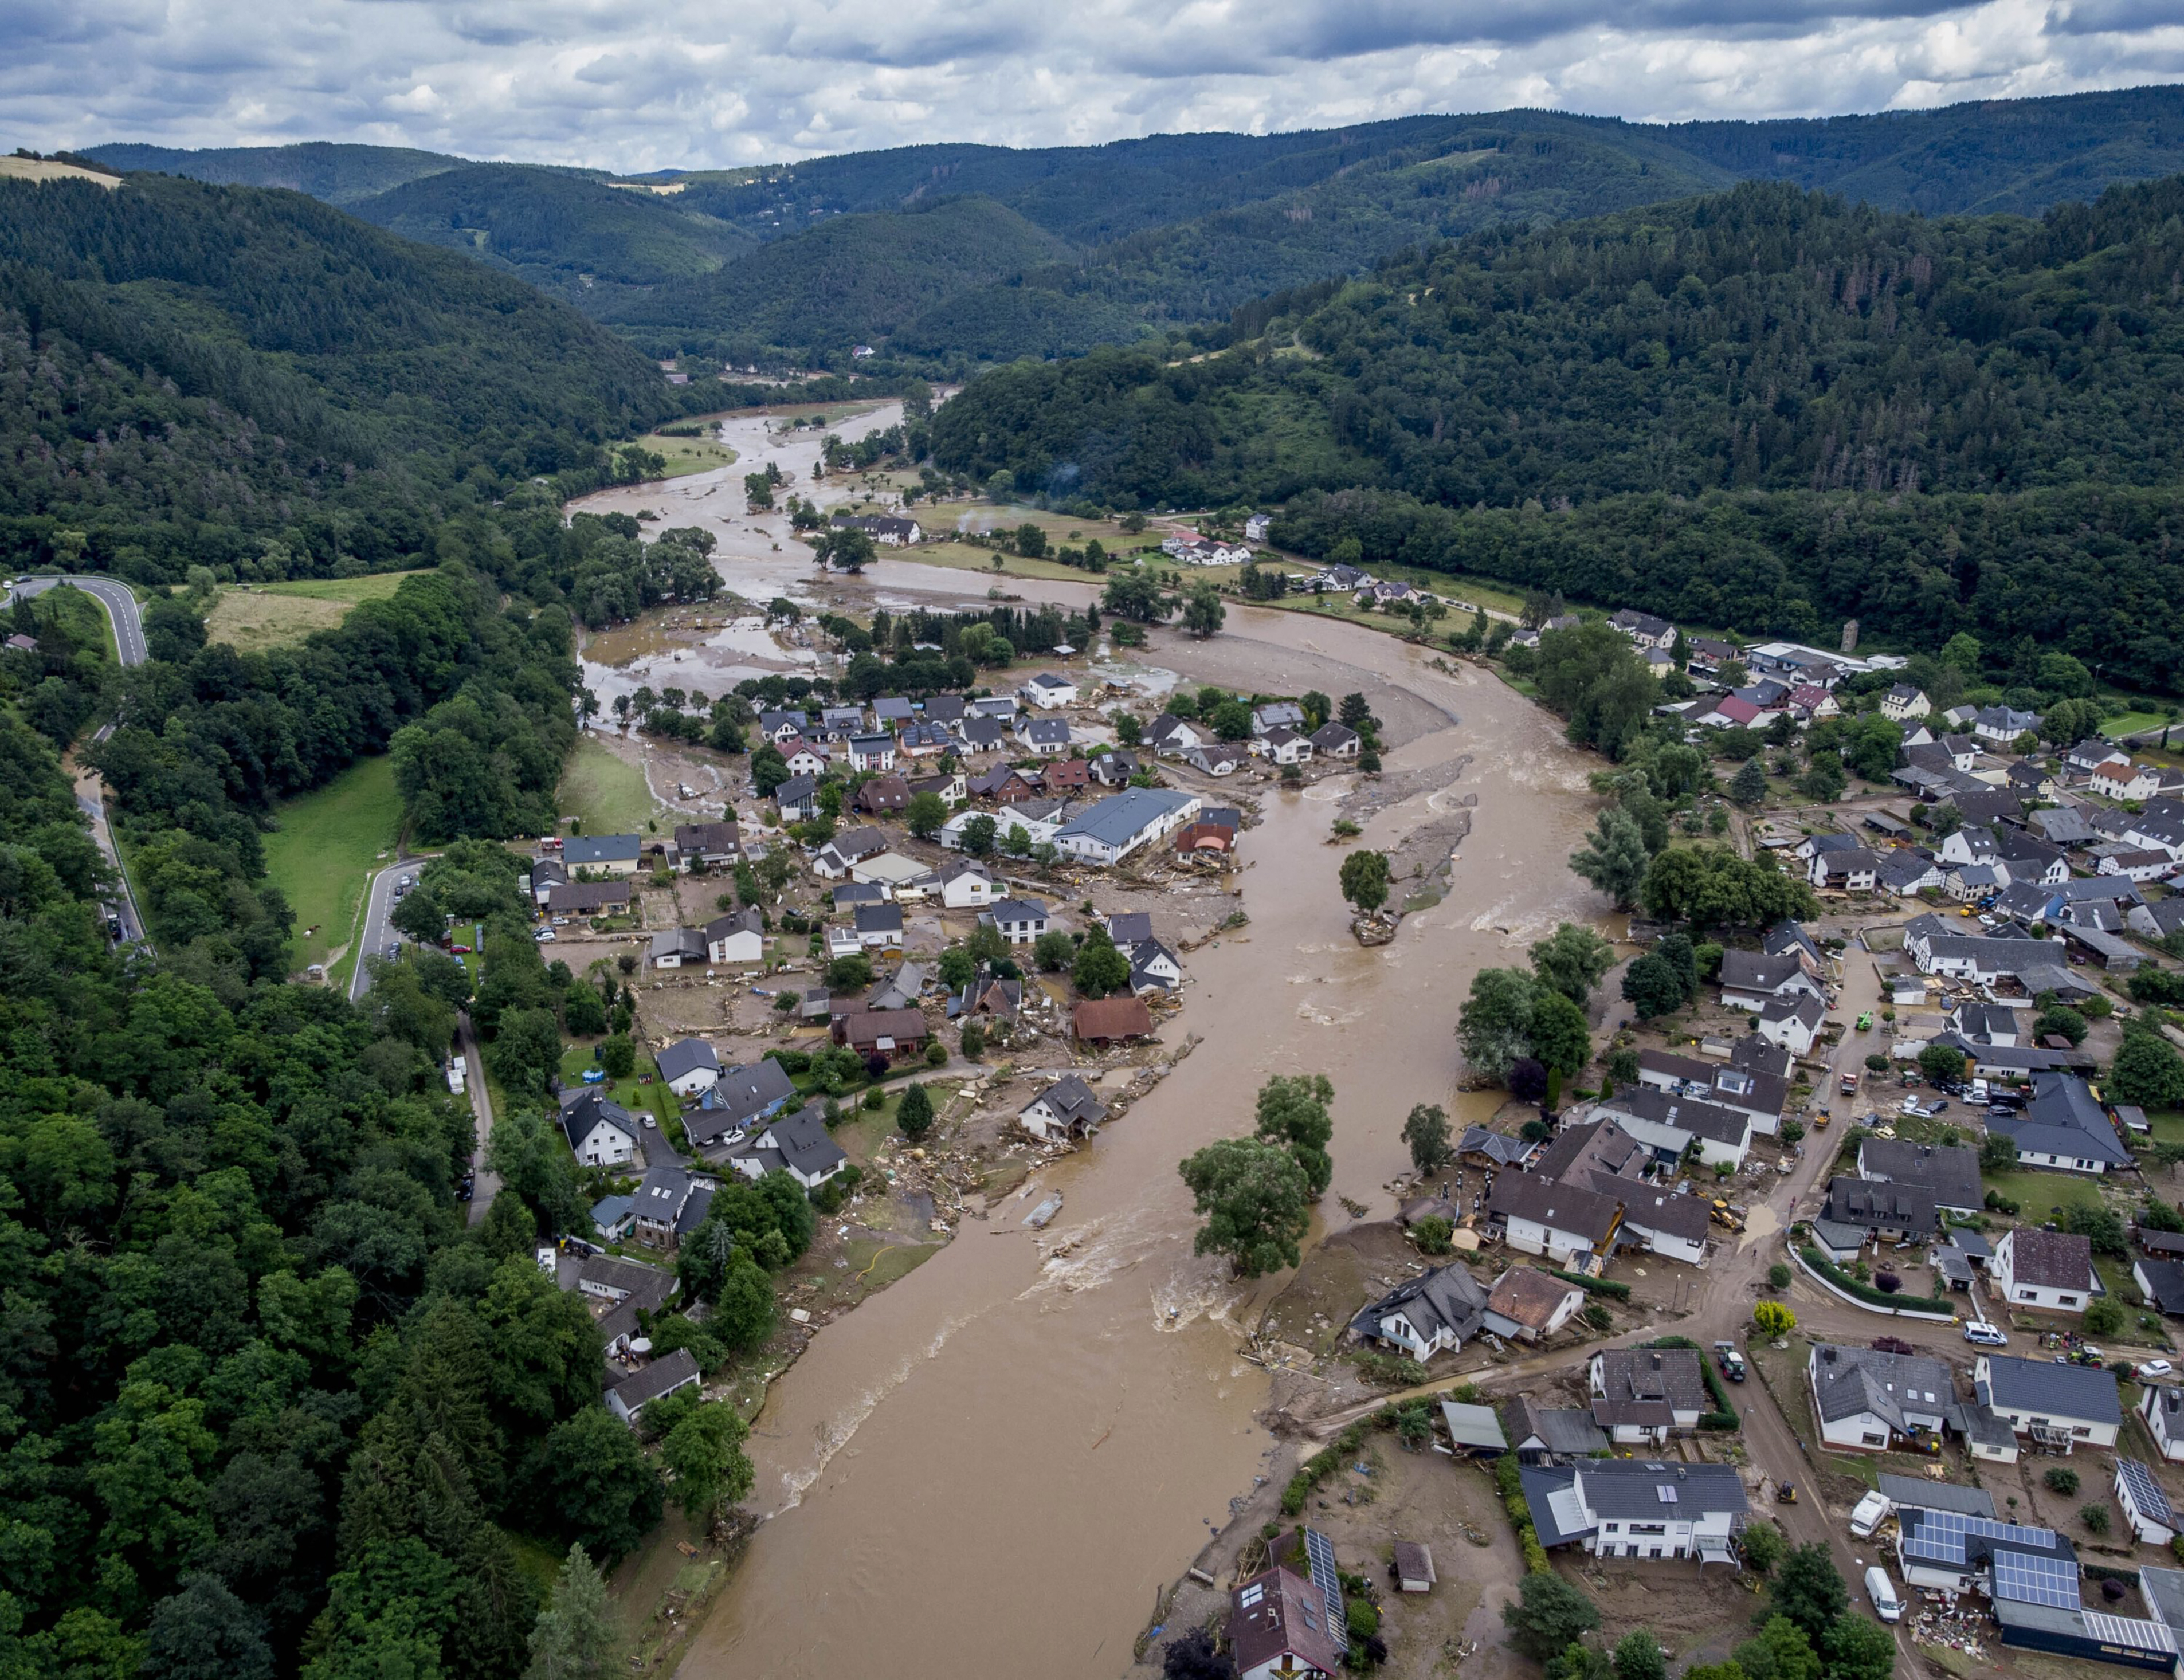 The Ahr river flowing past houses destroyed by floods in Insul, Germany, July 15, 2021.